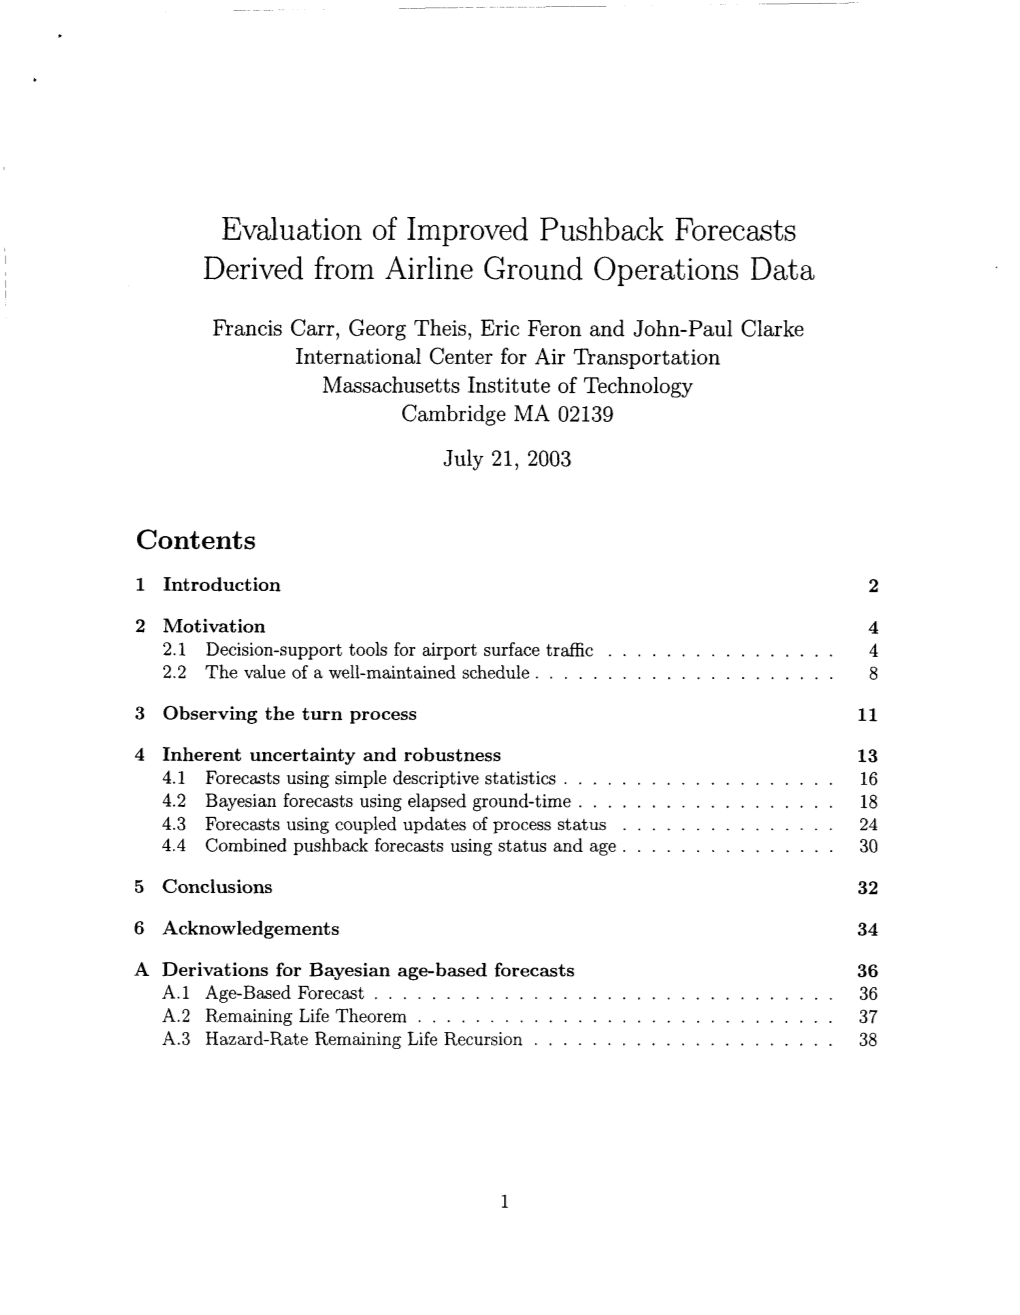 Evaluation of Improved Pushback Forecasts Derived from Airline Ground Operations Data